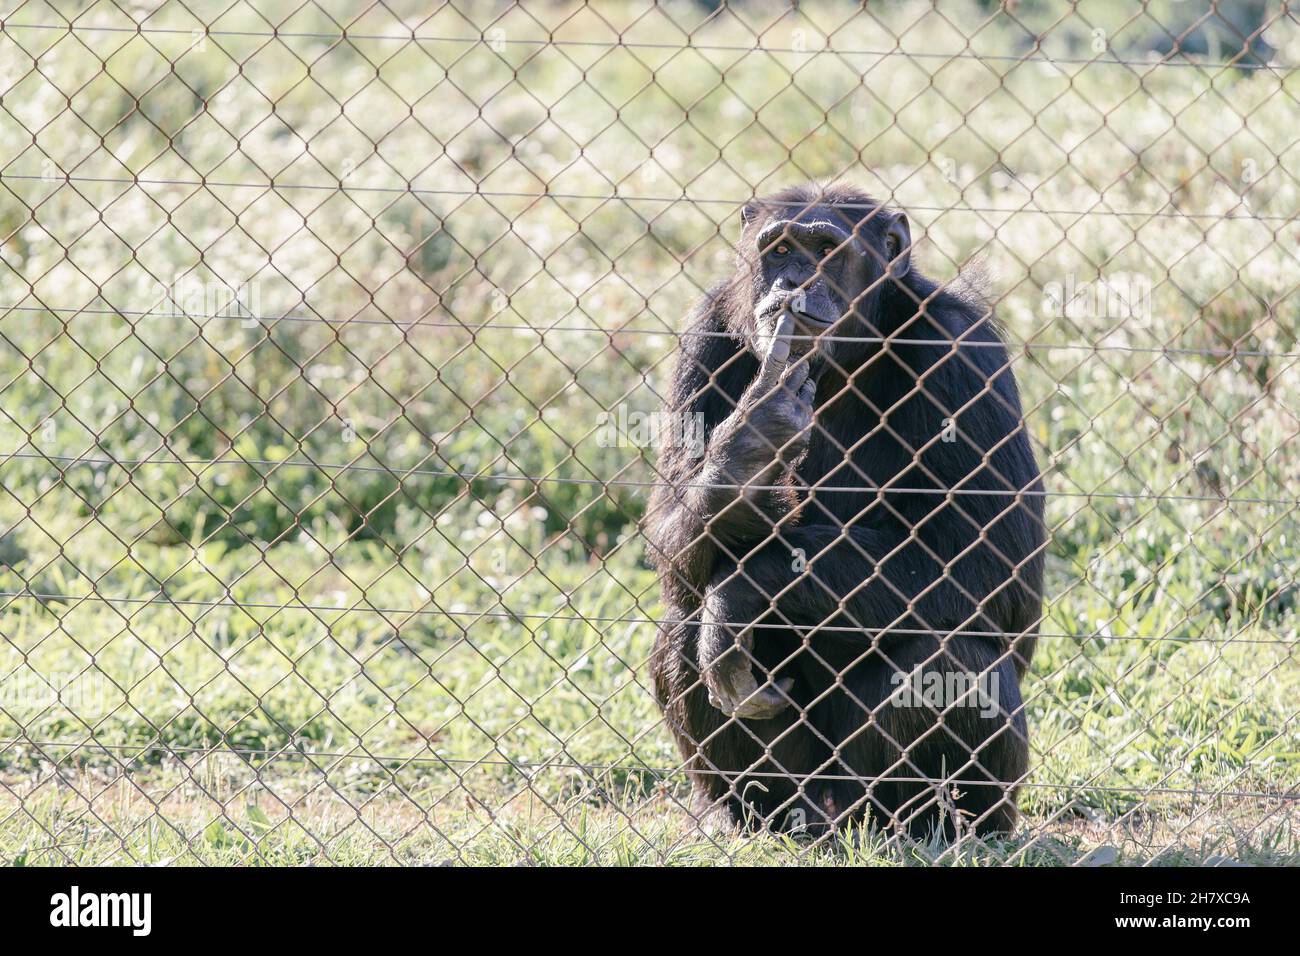 Old male chimpanzee behind a metal jail in captivity Stock Photo